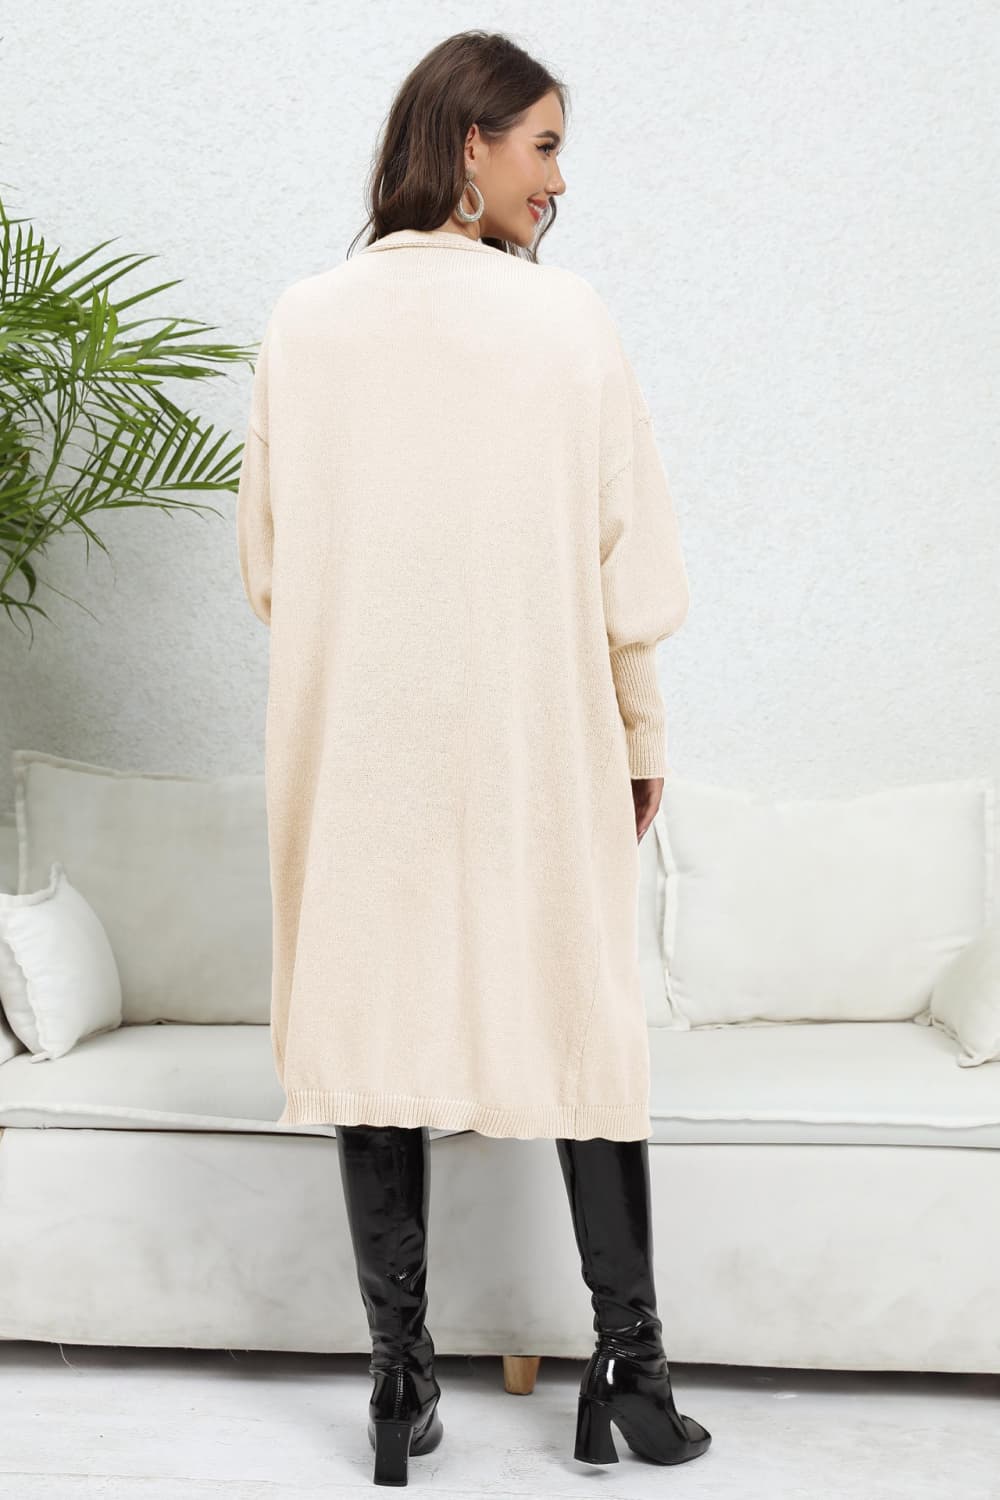 Open Front Dropped Shoulder Cardigan - Kawaii Stop - Cardigan, Cardigans, Casual Style, Easy Care, Effortless Chic, Fashion Forward, Lantern Sleeves, O & Y.M, Pocketed, Polyester, Relaxed Fit, Ship From Overseas, Slightly Stretchy, Solid, Women's Clothing, Women's Fashion